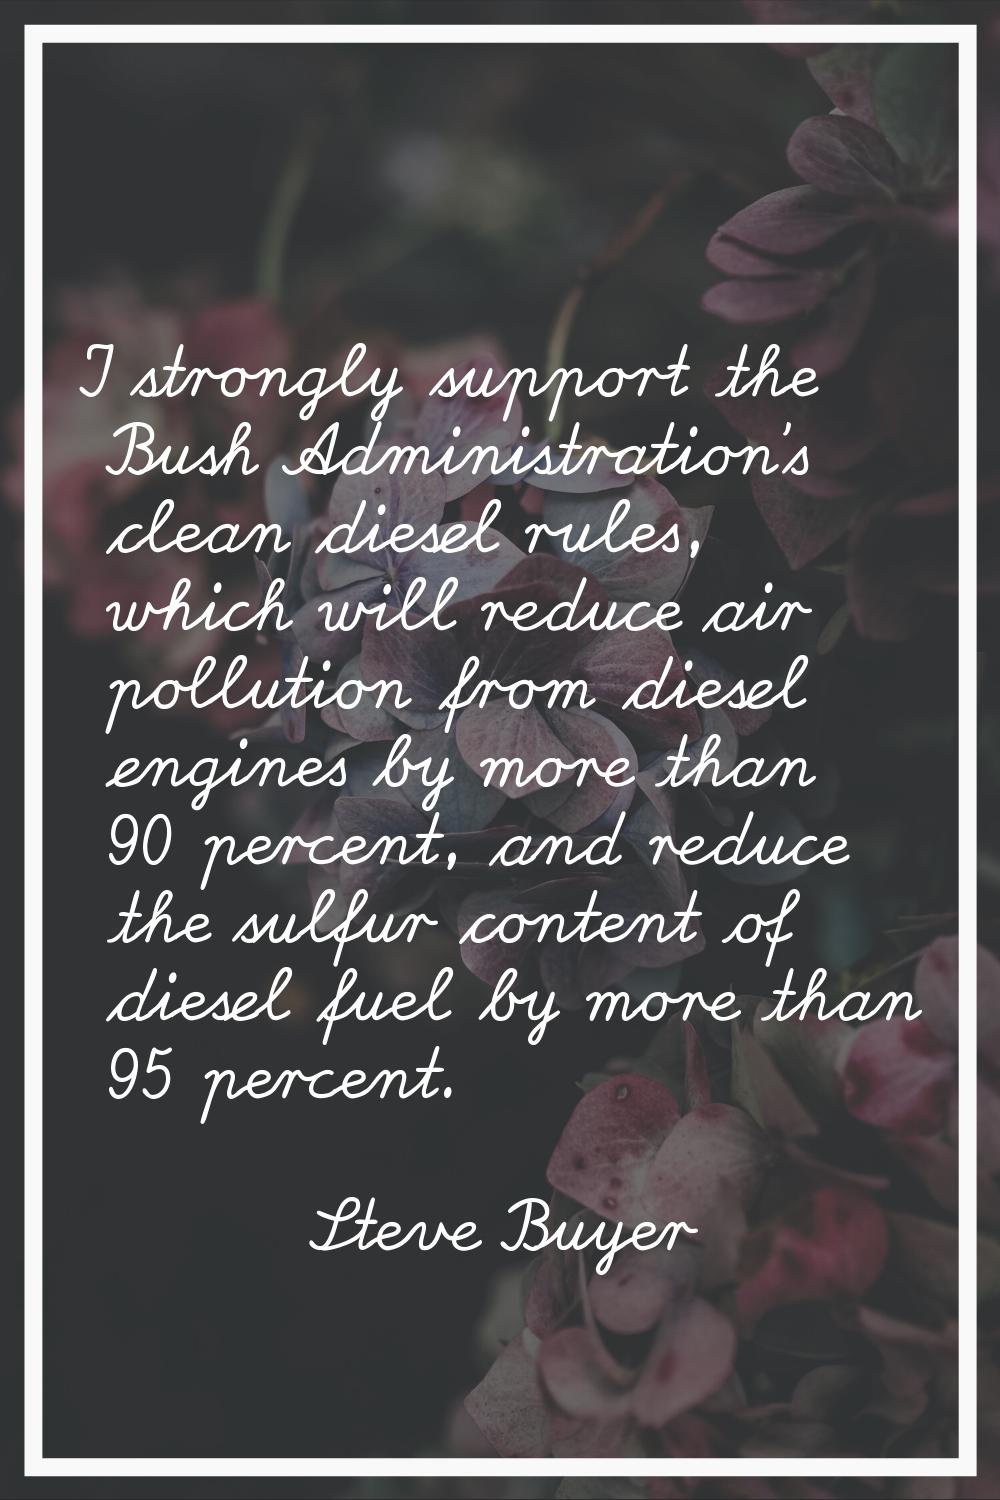 I strongly support the Bush Administration's clean diesel rules, which will reduce air pollution fr